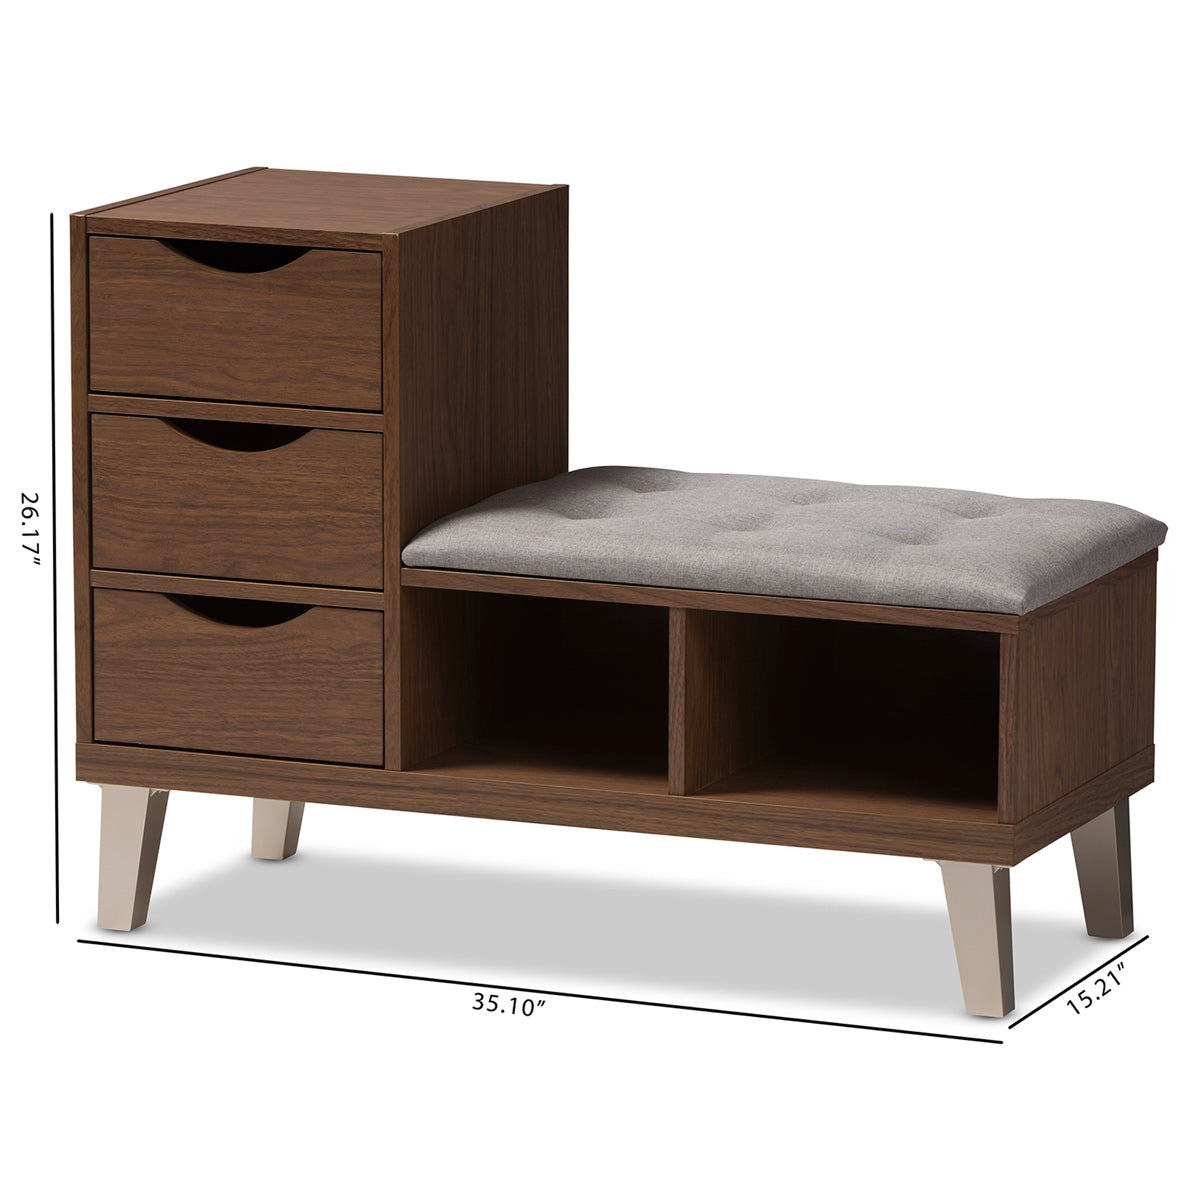 Baxton Studio Arielle Modern and Contemporary Walnut Wood 3-Drawer Shoe Storage Grey Fabric Upholstered Seating Bench with Two Open Shelves Baxton Studio-0-Minimal And Modern - 9